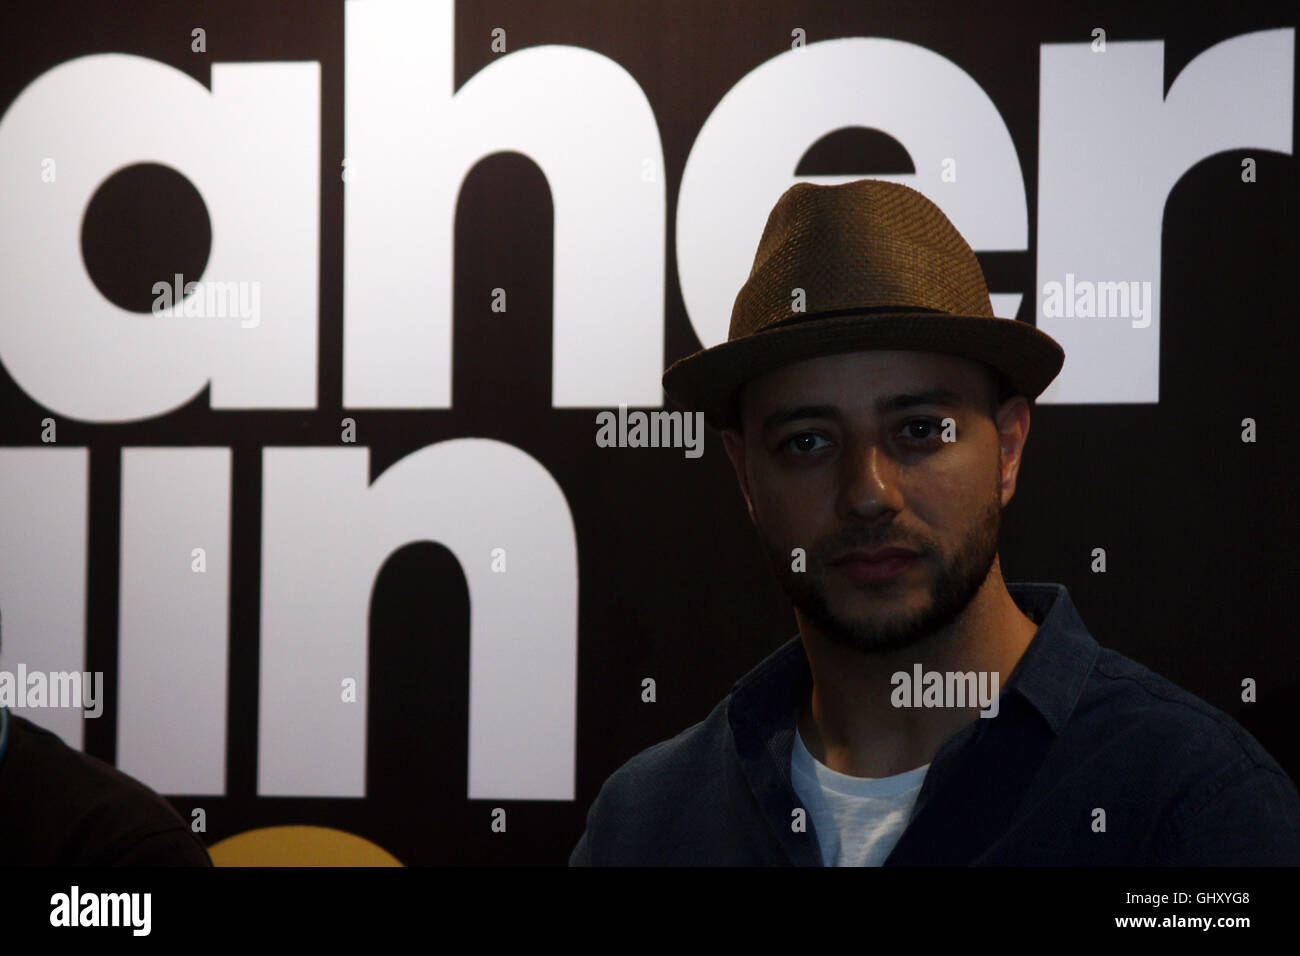 Central Jakarta, Indonesia. 11th Aug, 2016. Swedish singer, Maher Zain in a  press conference, few days before his solo concert at Mandarin Oriental  Hotel. The pop religious singer, Maher Zain will be